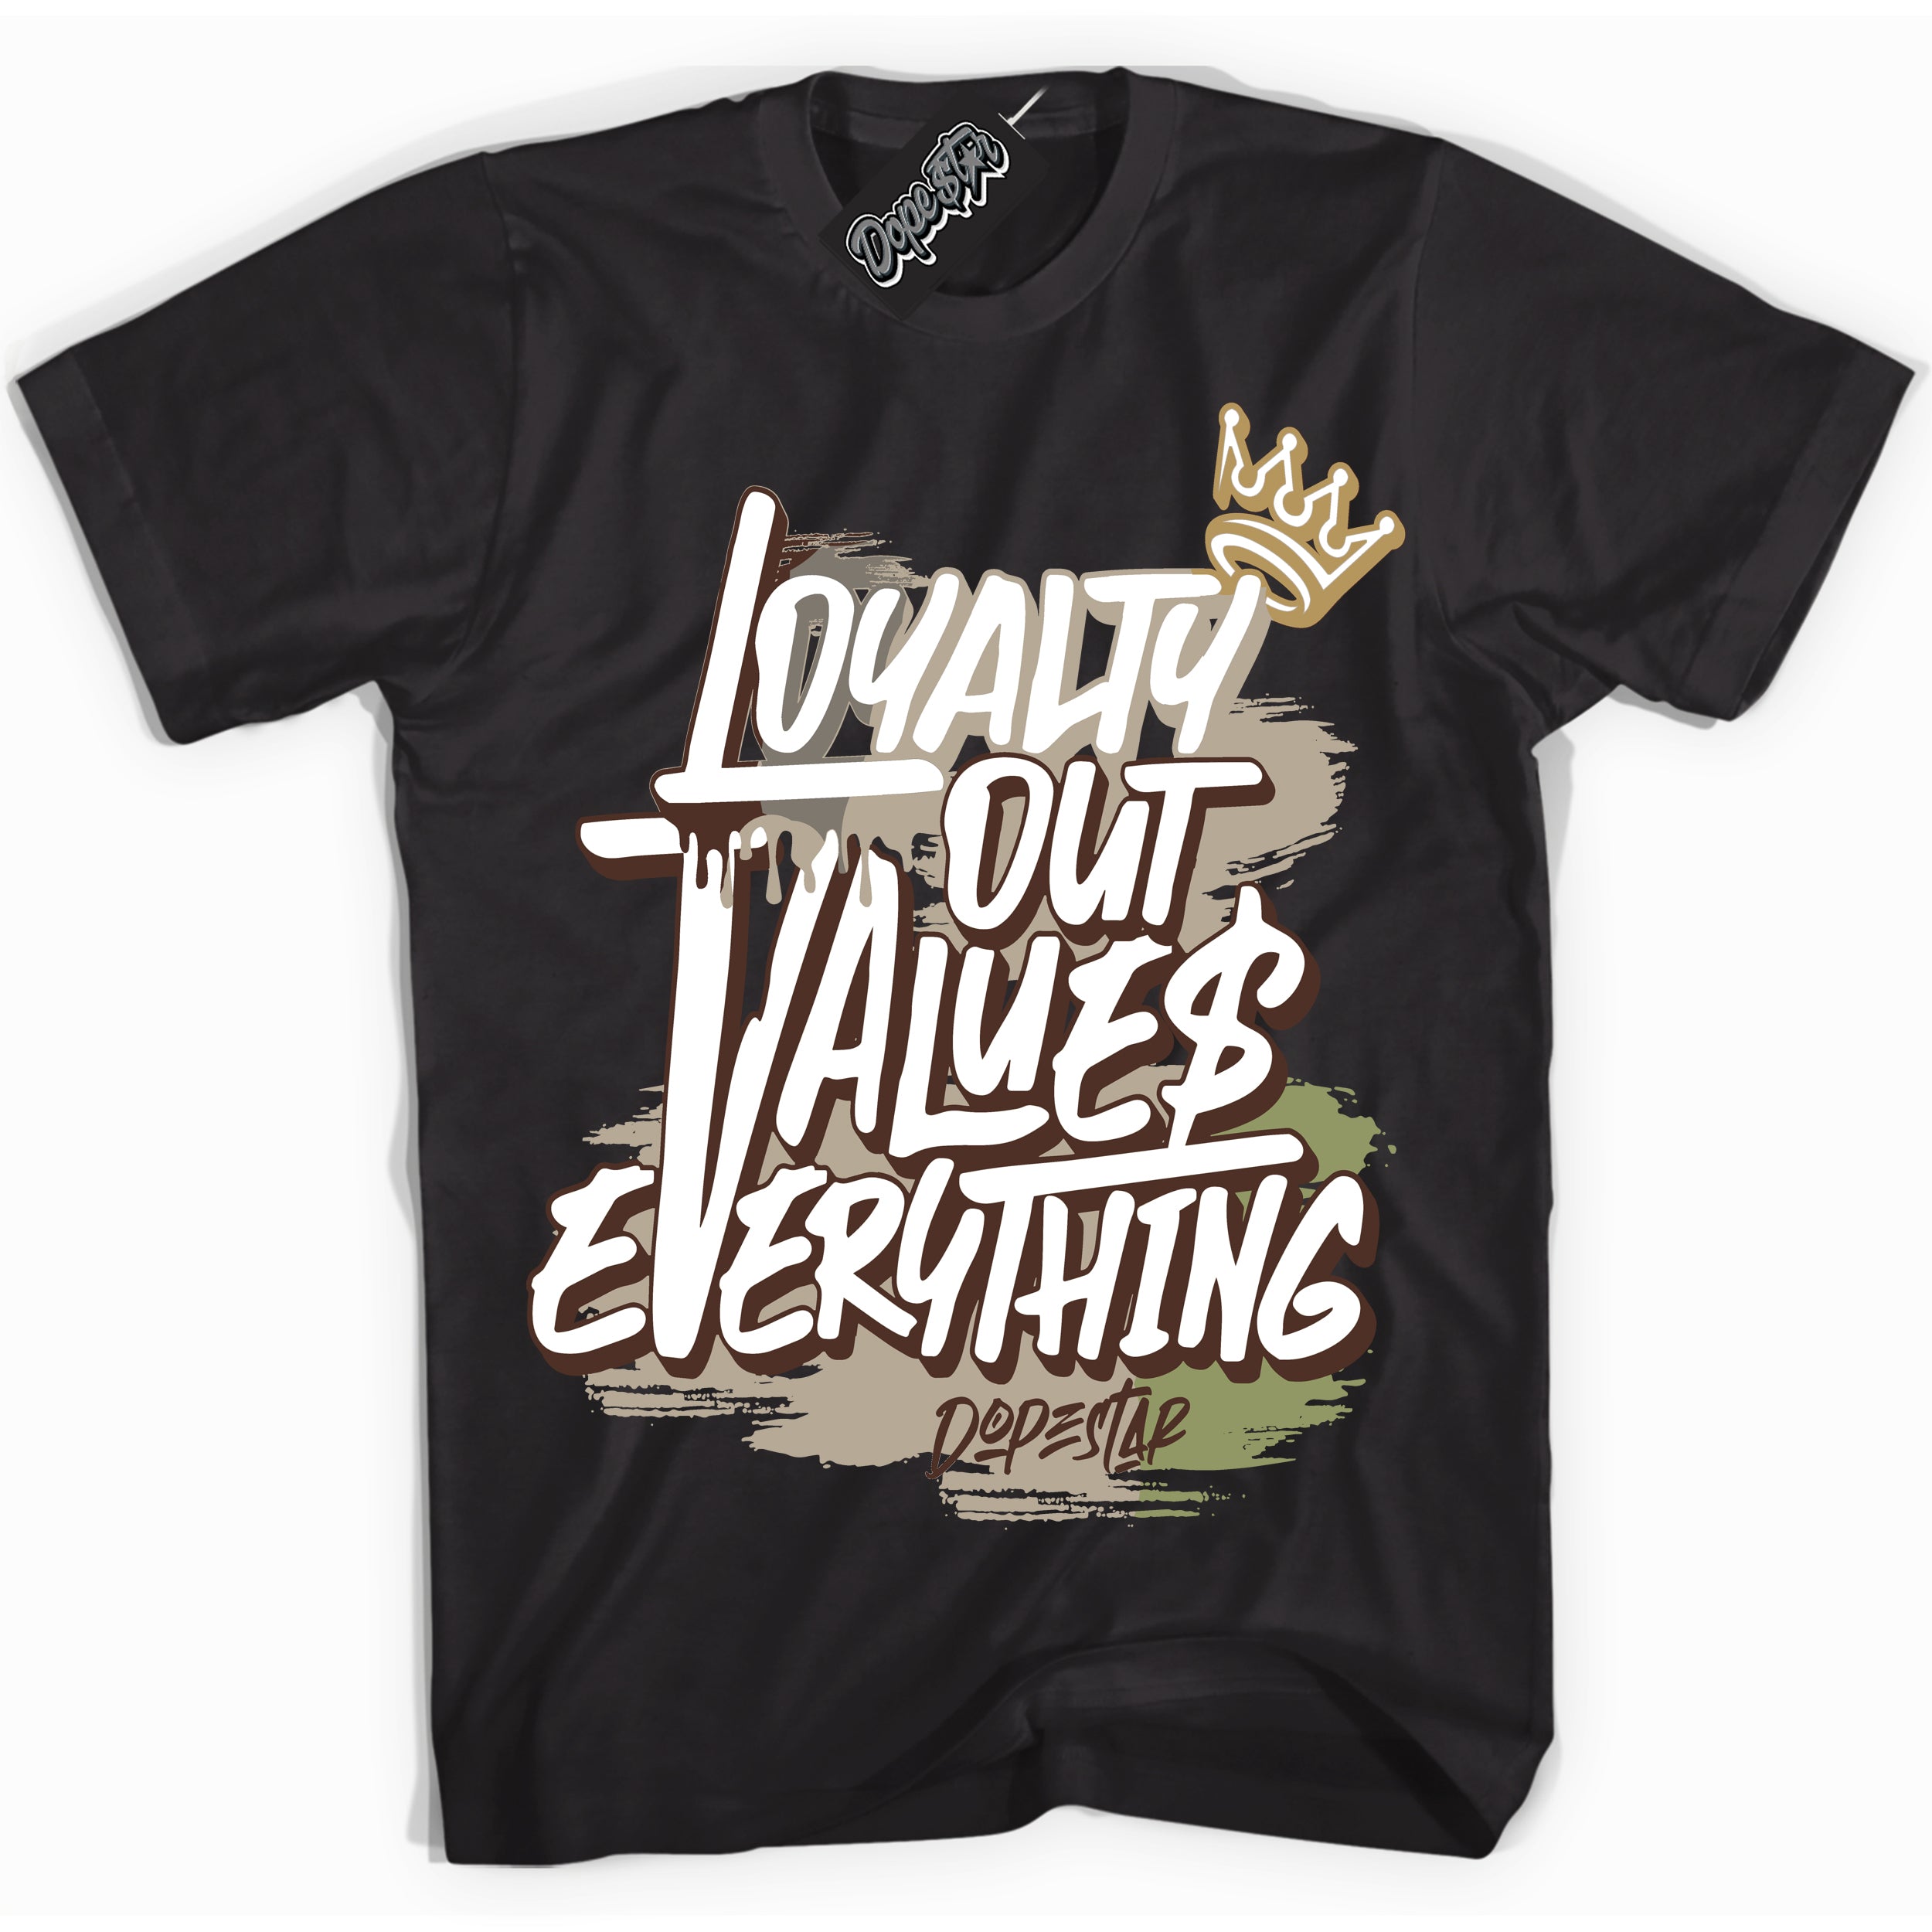 Cool Black Shirt with “ Loyalty Out Values Everything” design that perfectly matches Zion Williamson Voodoo 1s Sneakers.